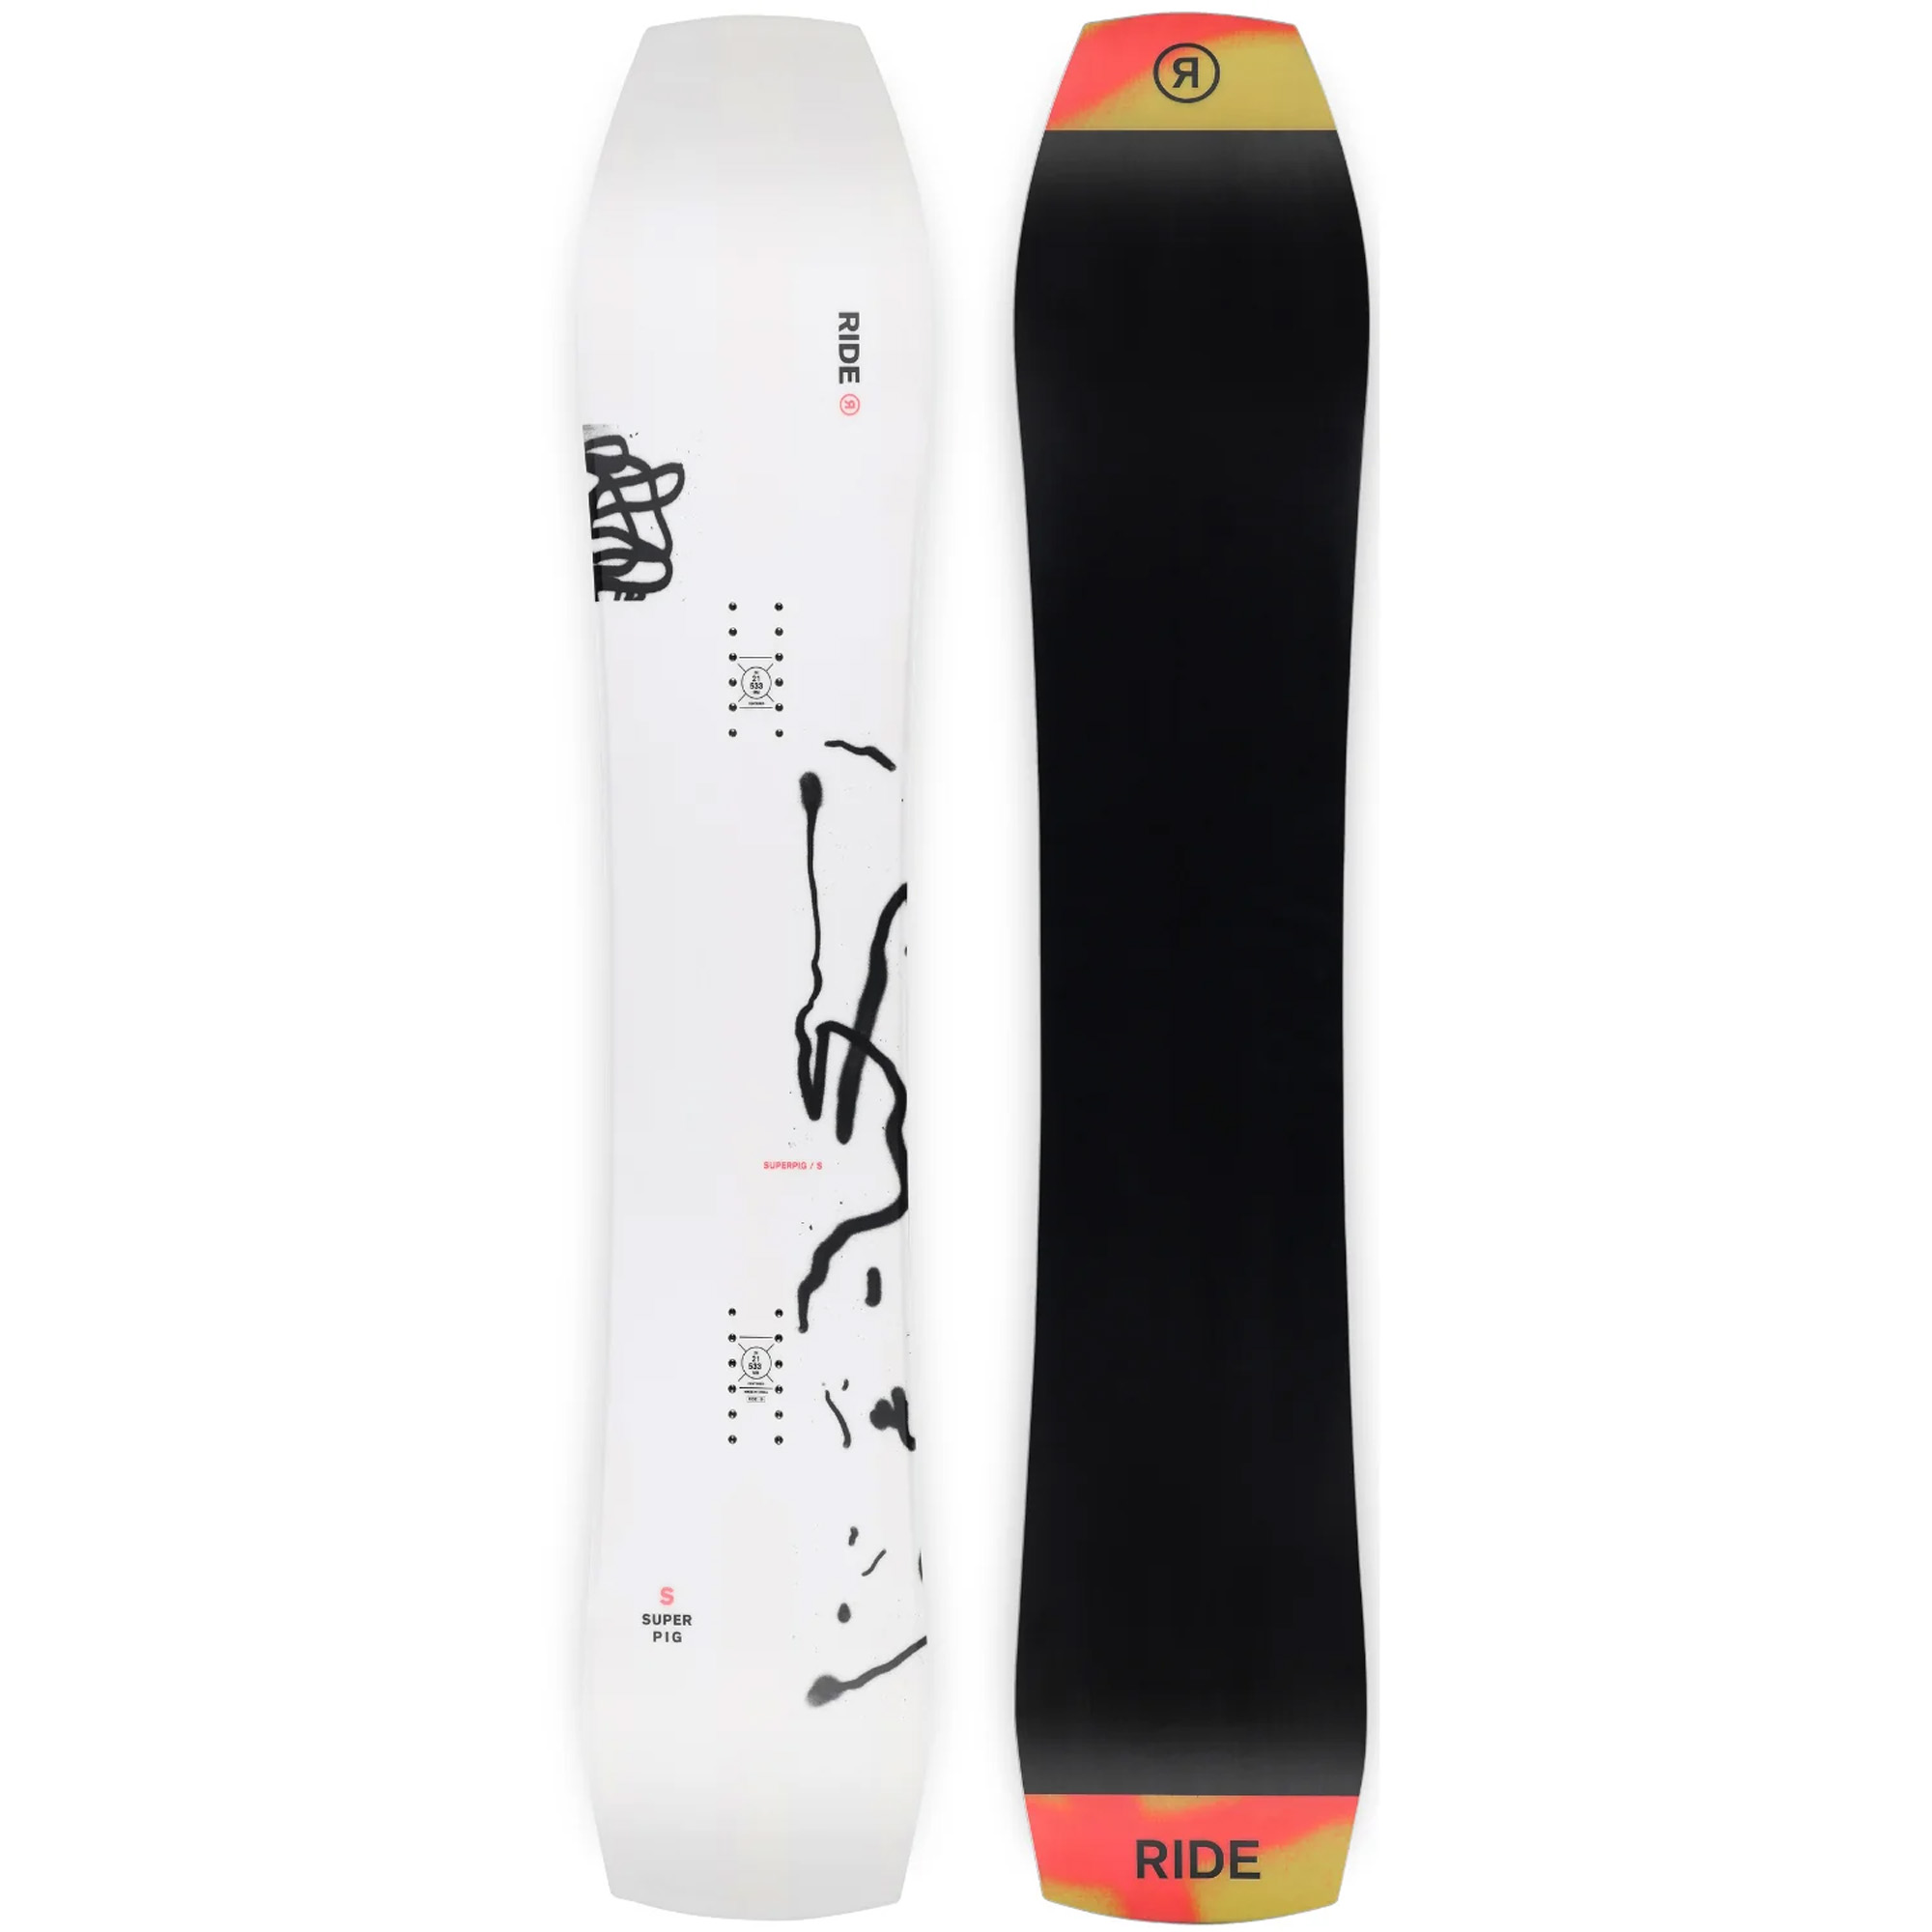 Ride SuperPig All Mountain/Freeride Snowboard